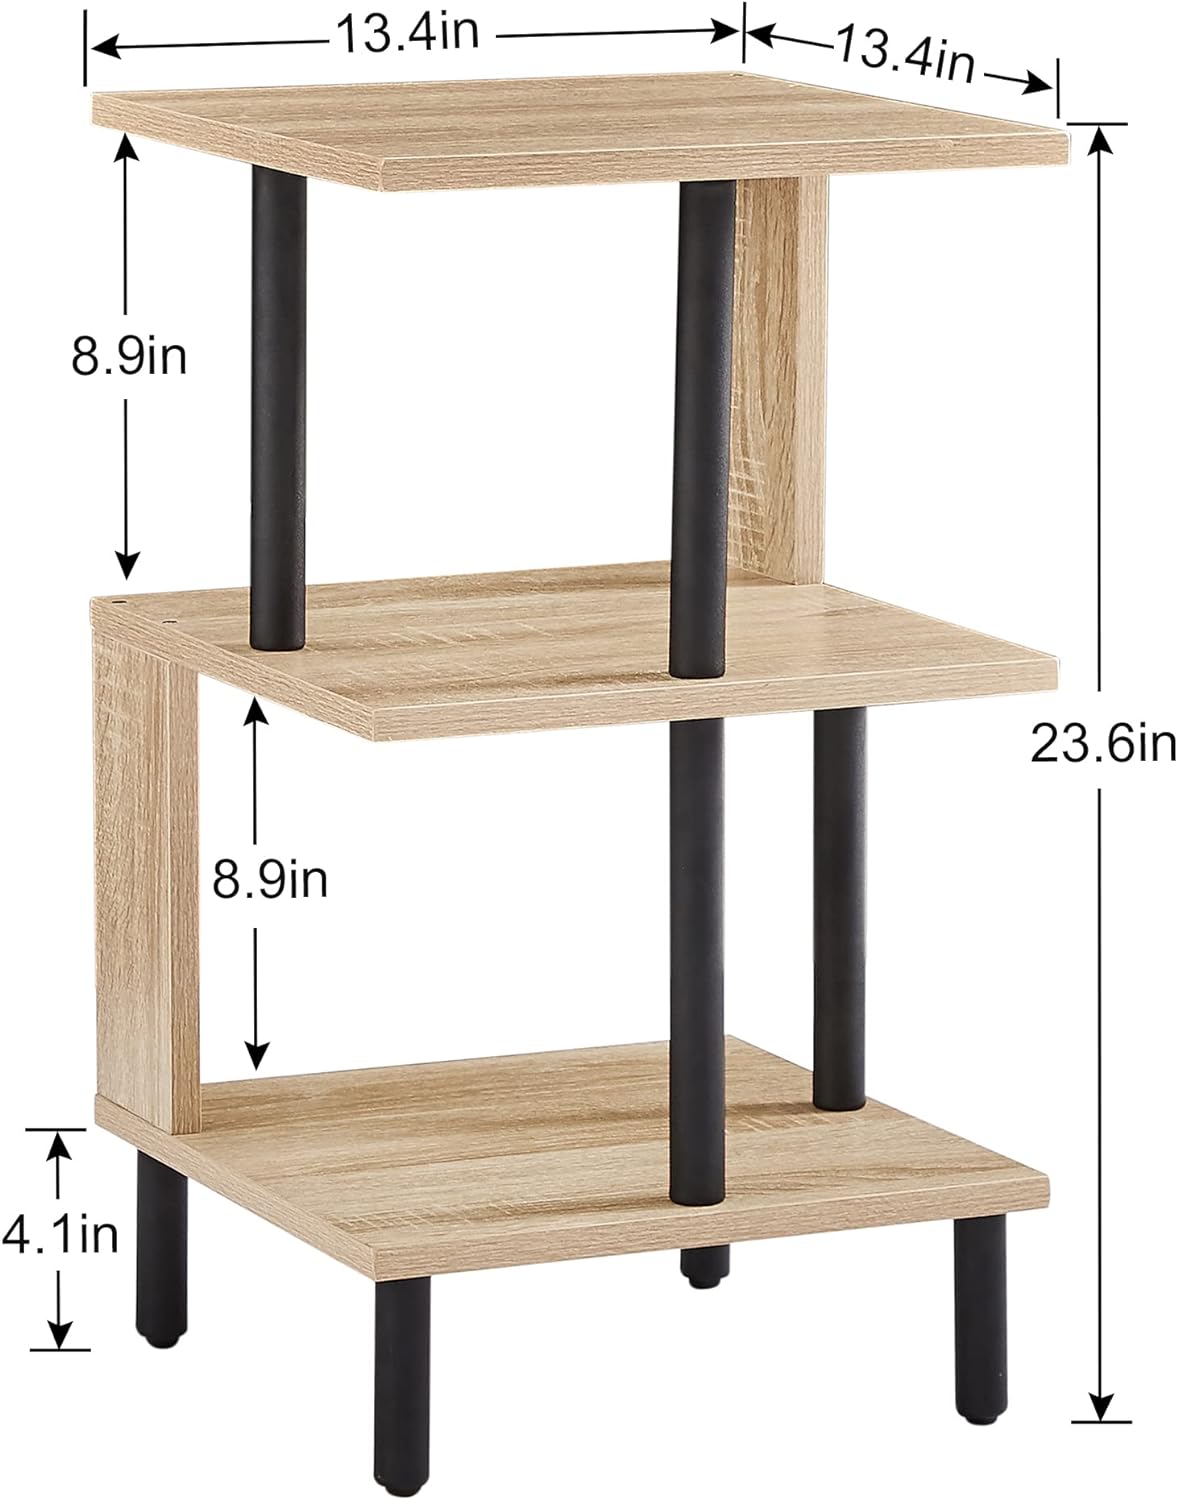 Vecelo S Shaped End Table dimensions